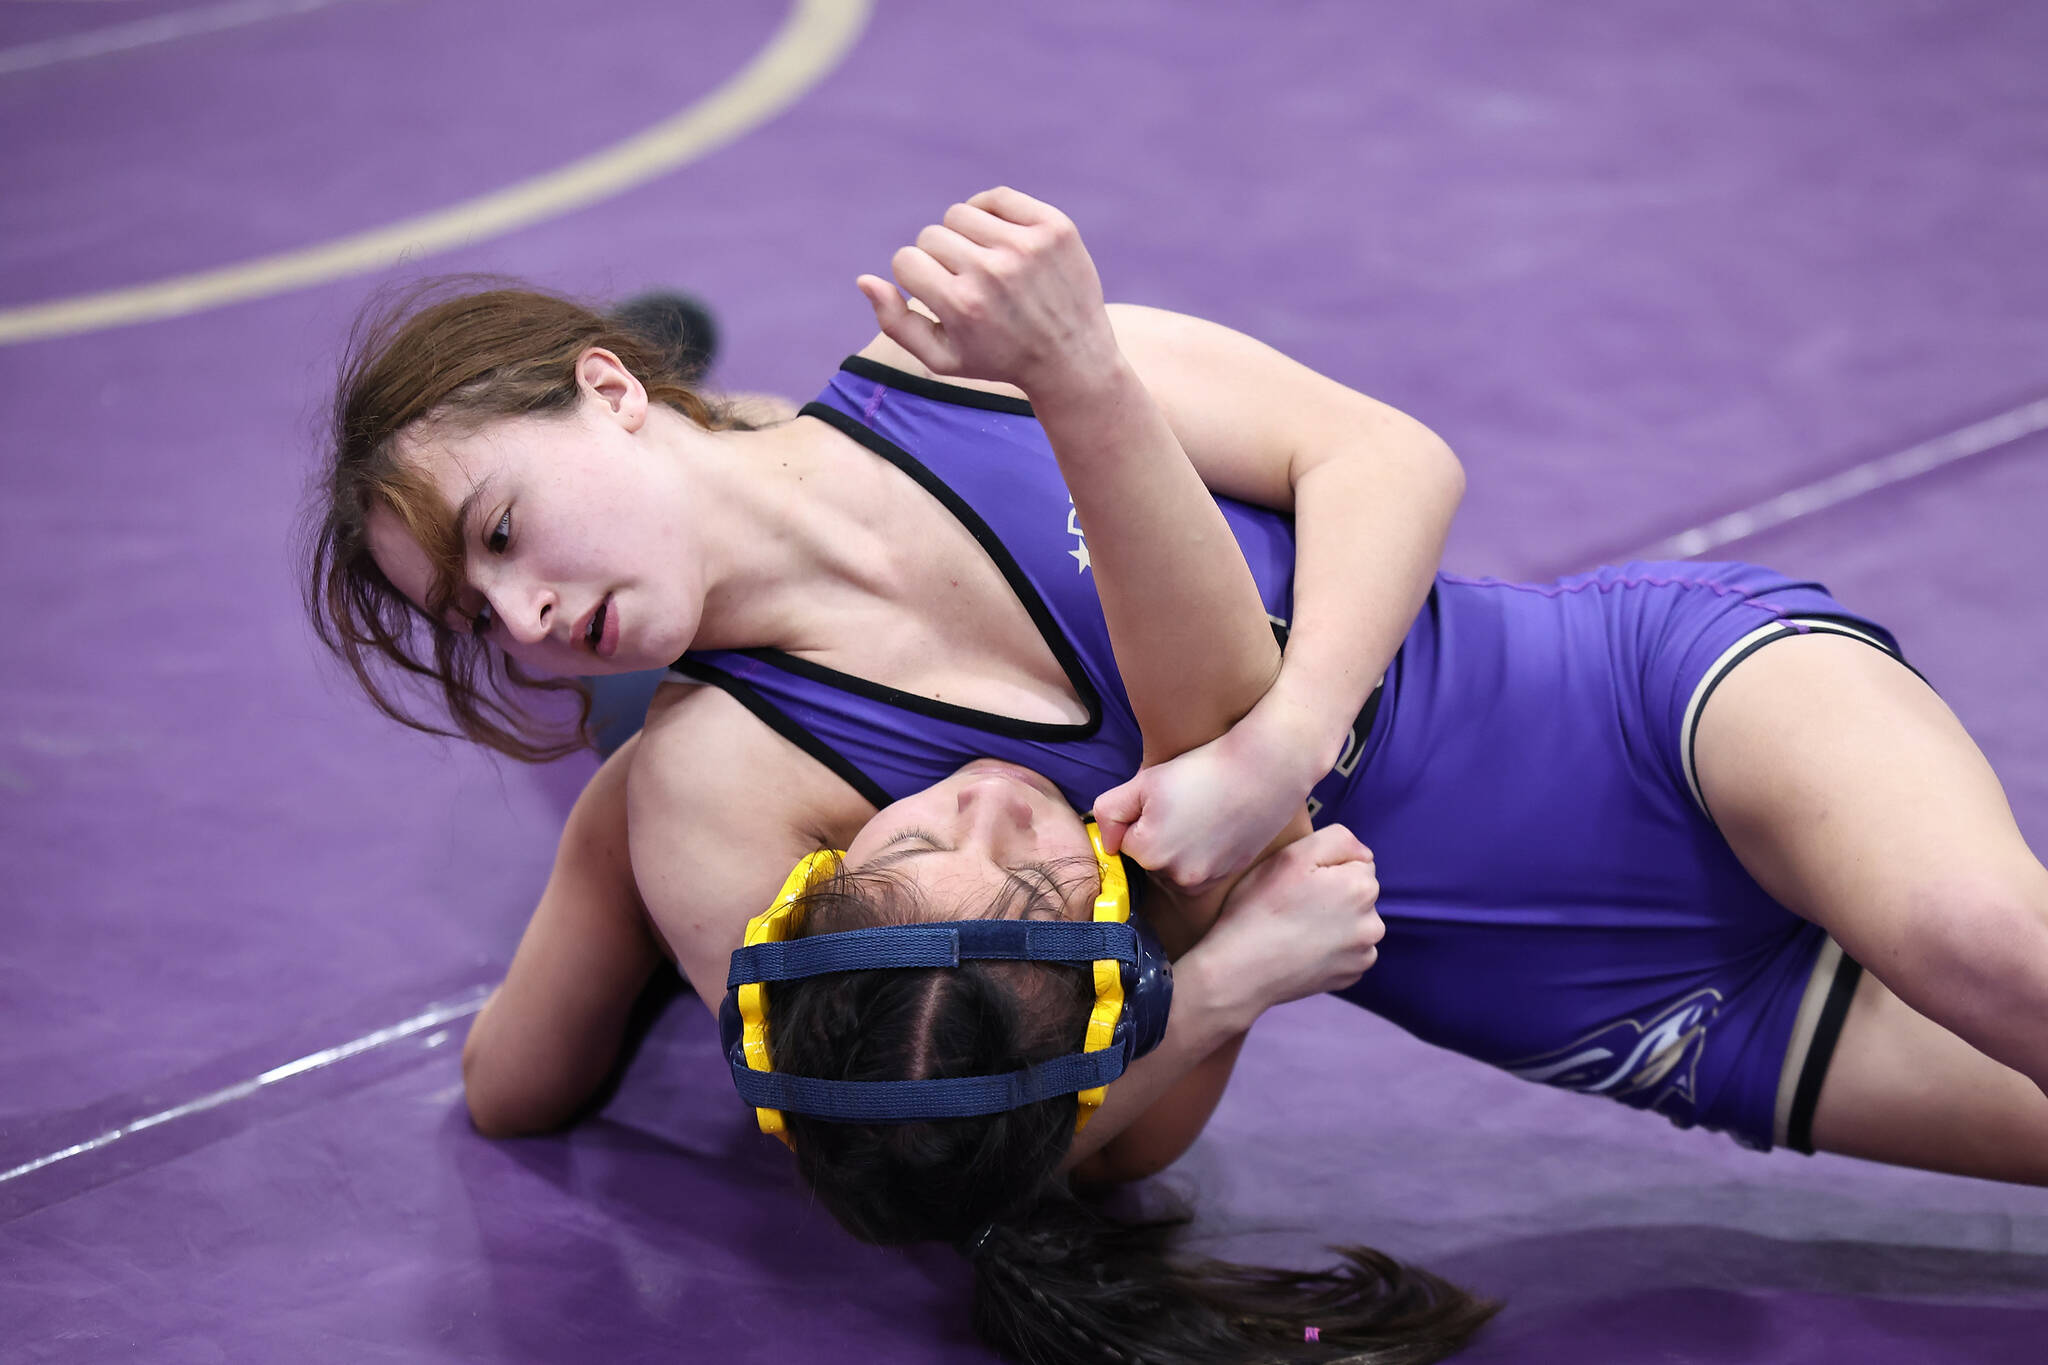 Oak Harbor’s Julia Gonzales tries to pin an opponent during a match Saturday during the Rock Island Rumble tournament Saturday that saw 13 schools compete at Oak Harbor High School. Gonzales placed first in the 100-pound weight class. (Photo by John Fisken)